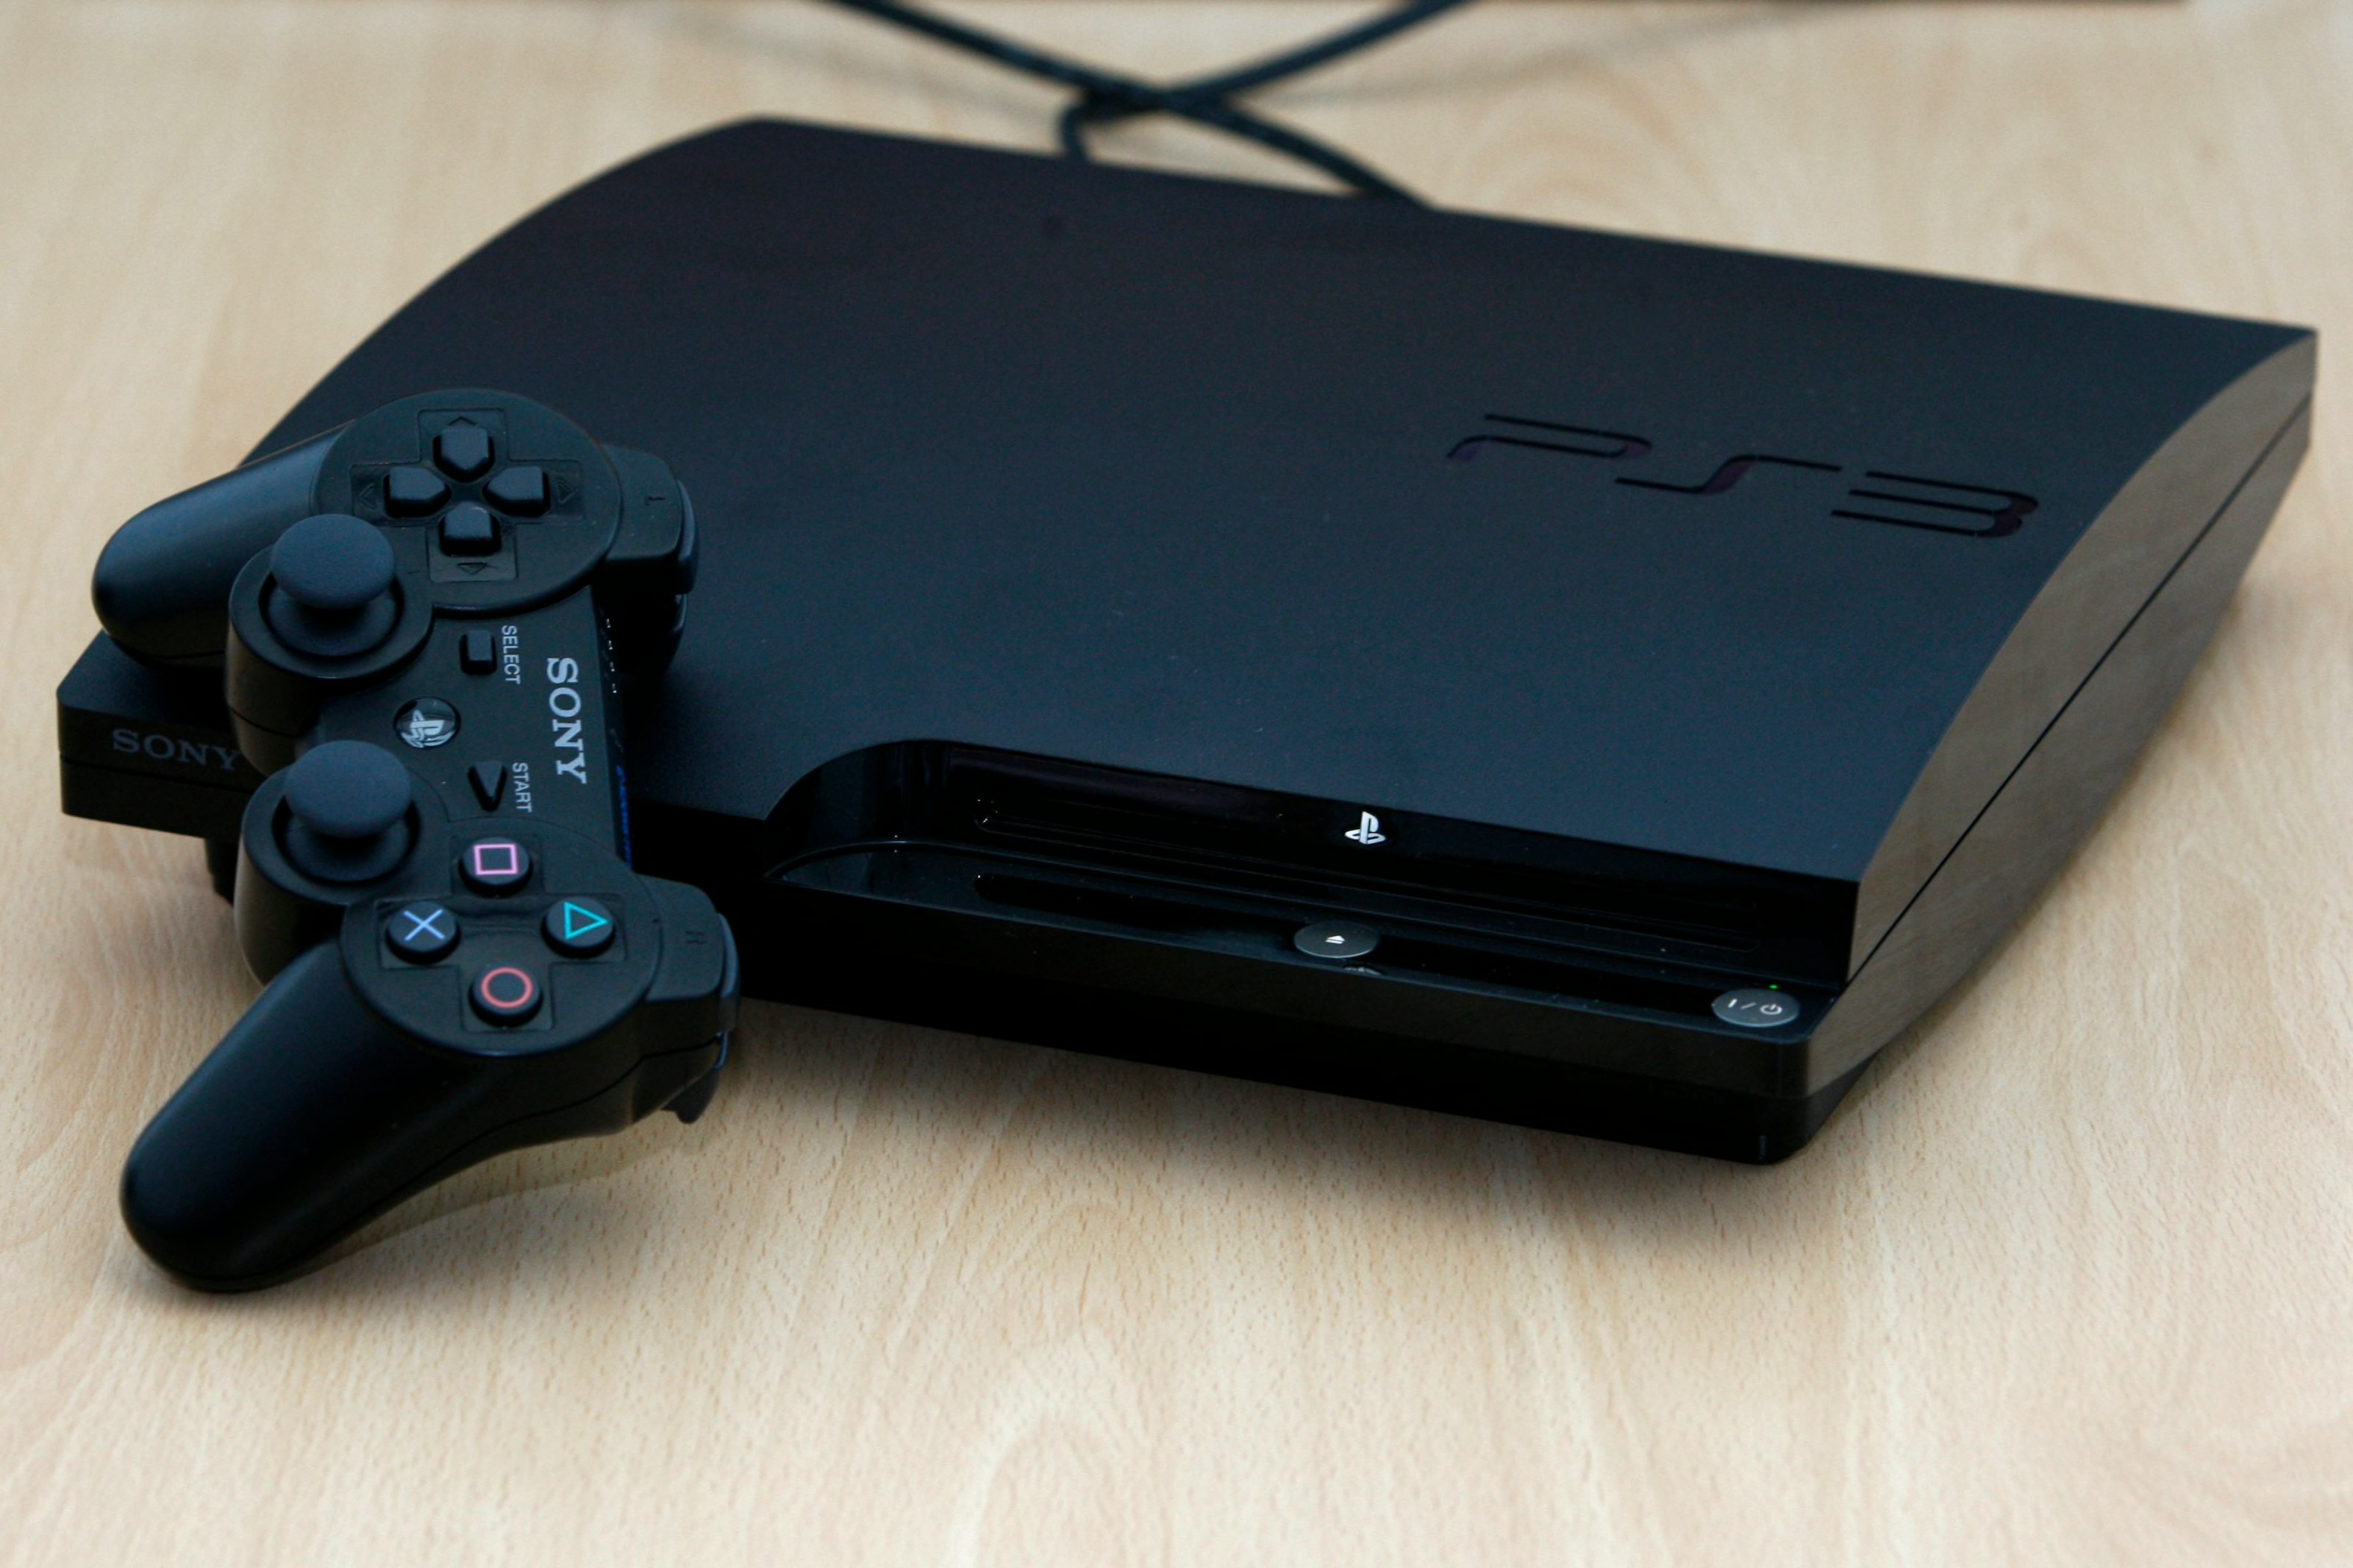 Sony Is Not Closing PlayStation Store for PS3, PS Vita After All (Sorry,  PSP)